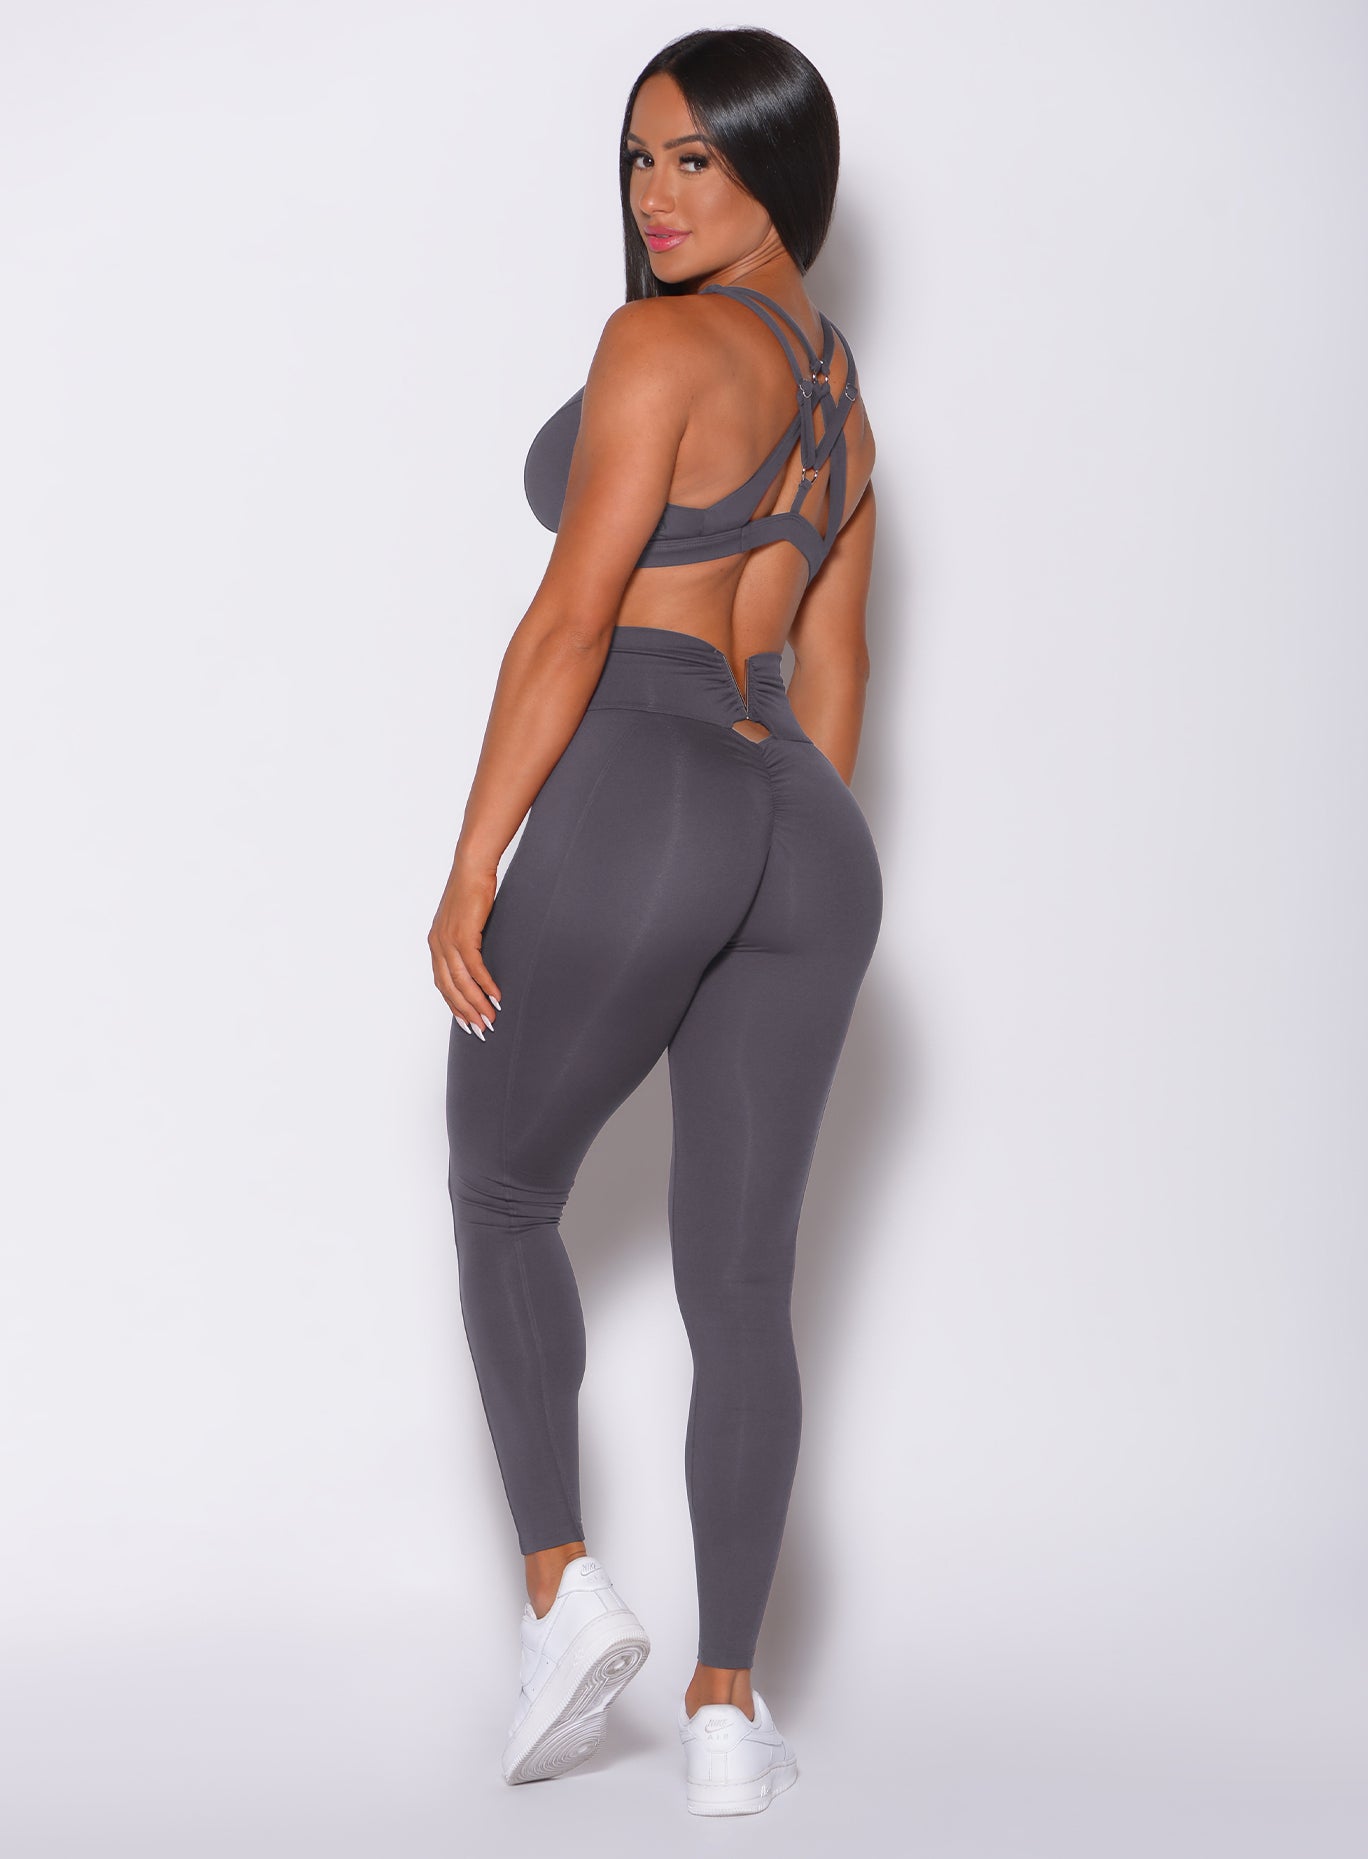 Left side profile view of a model facing to her left wearing our victory scrunch leggings in shadow color and a matching sports bra